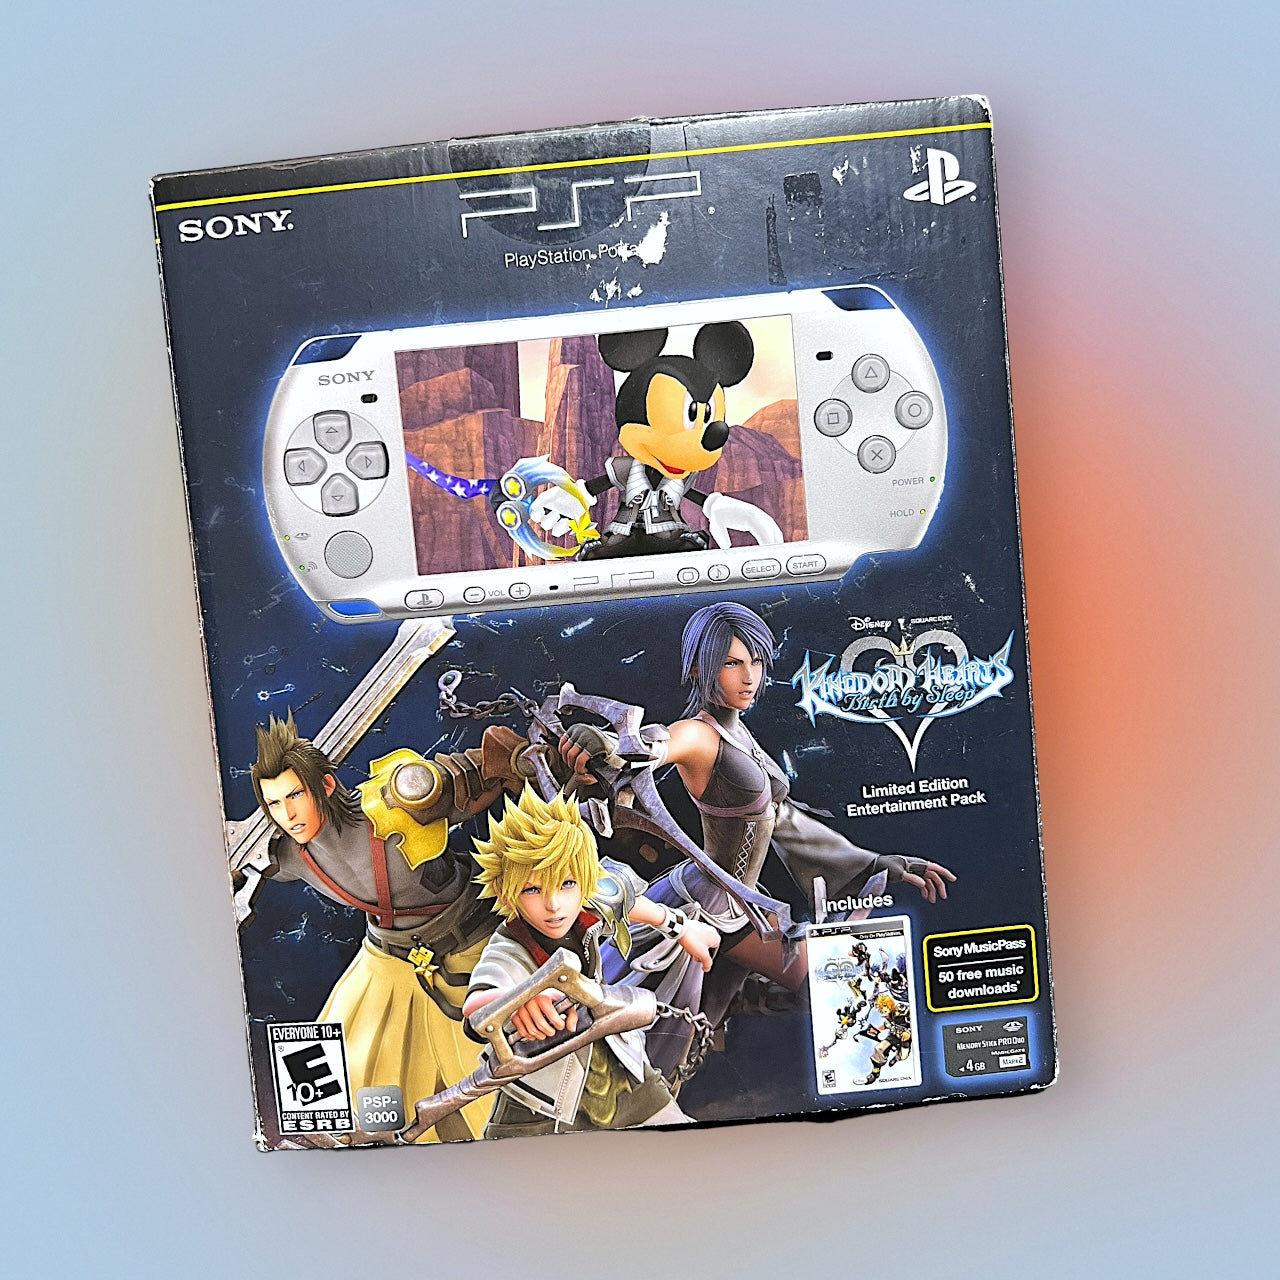 Sony PlayStation Portable 3000 - Kingdom Hearts: Birth By Sleep Limited Edition Entertainment Pack (Sony, Square Enix, 2010)